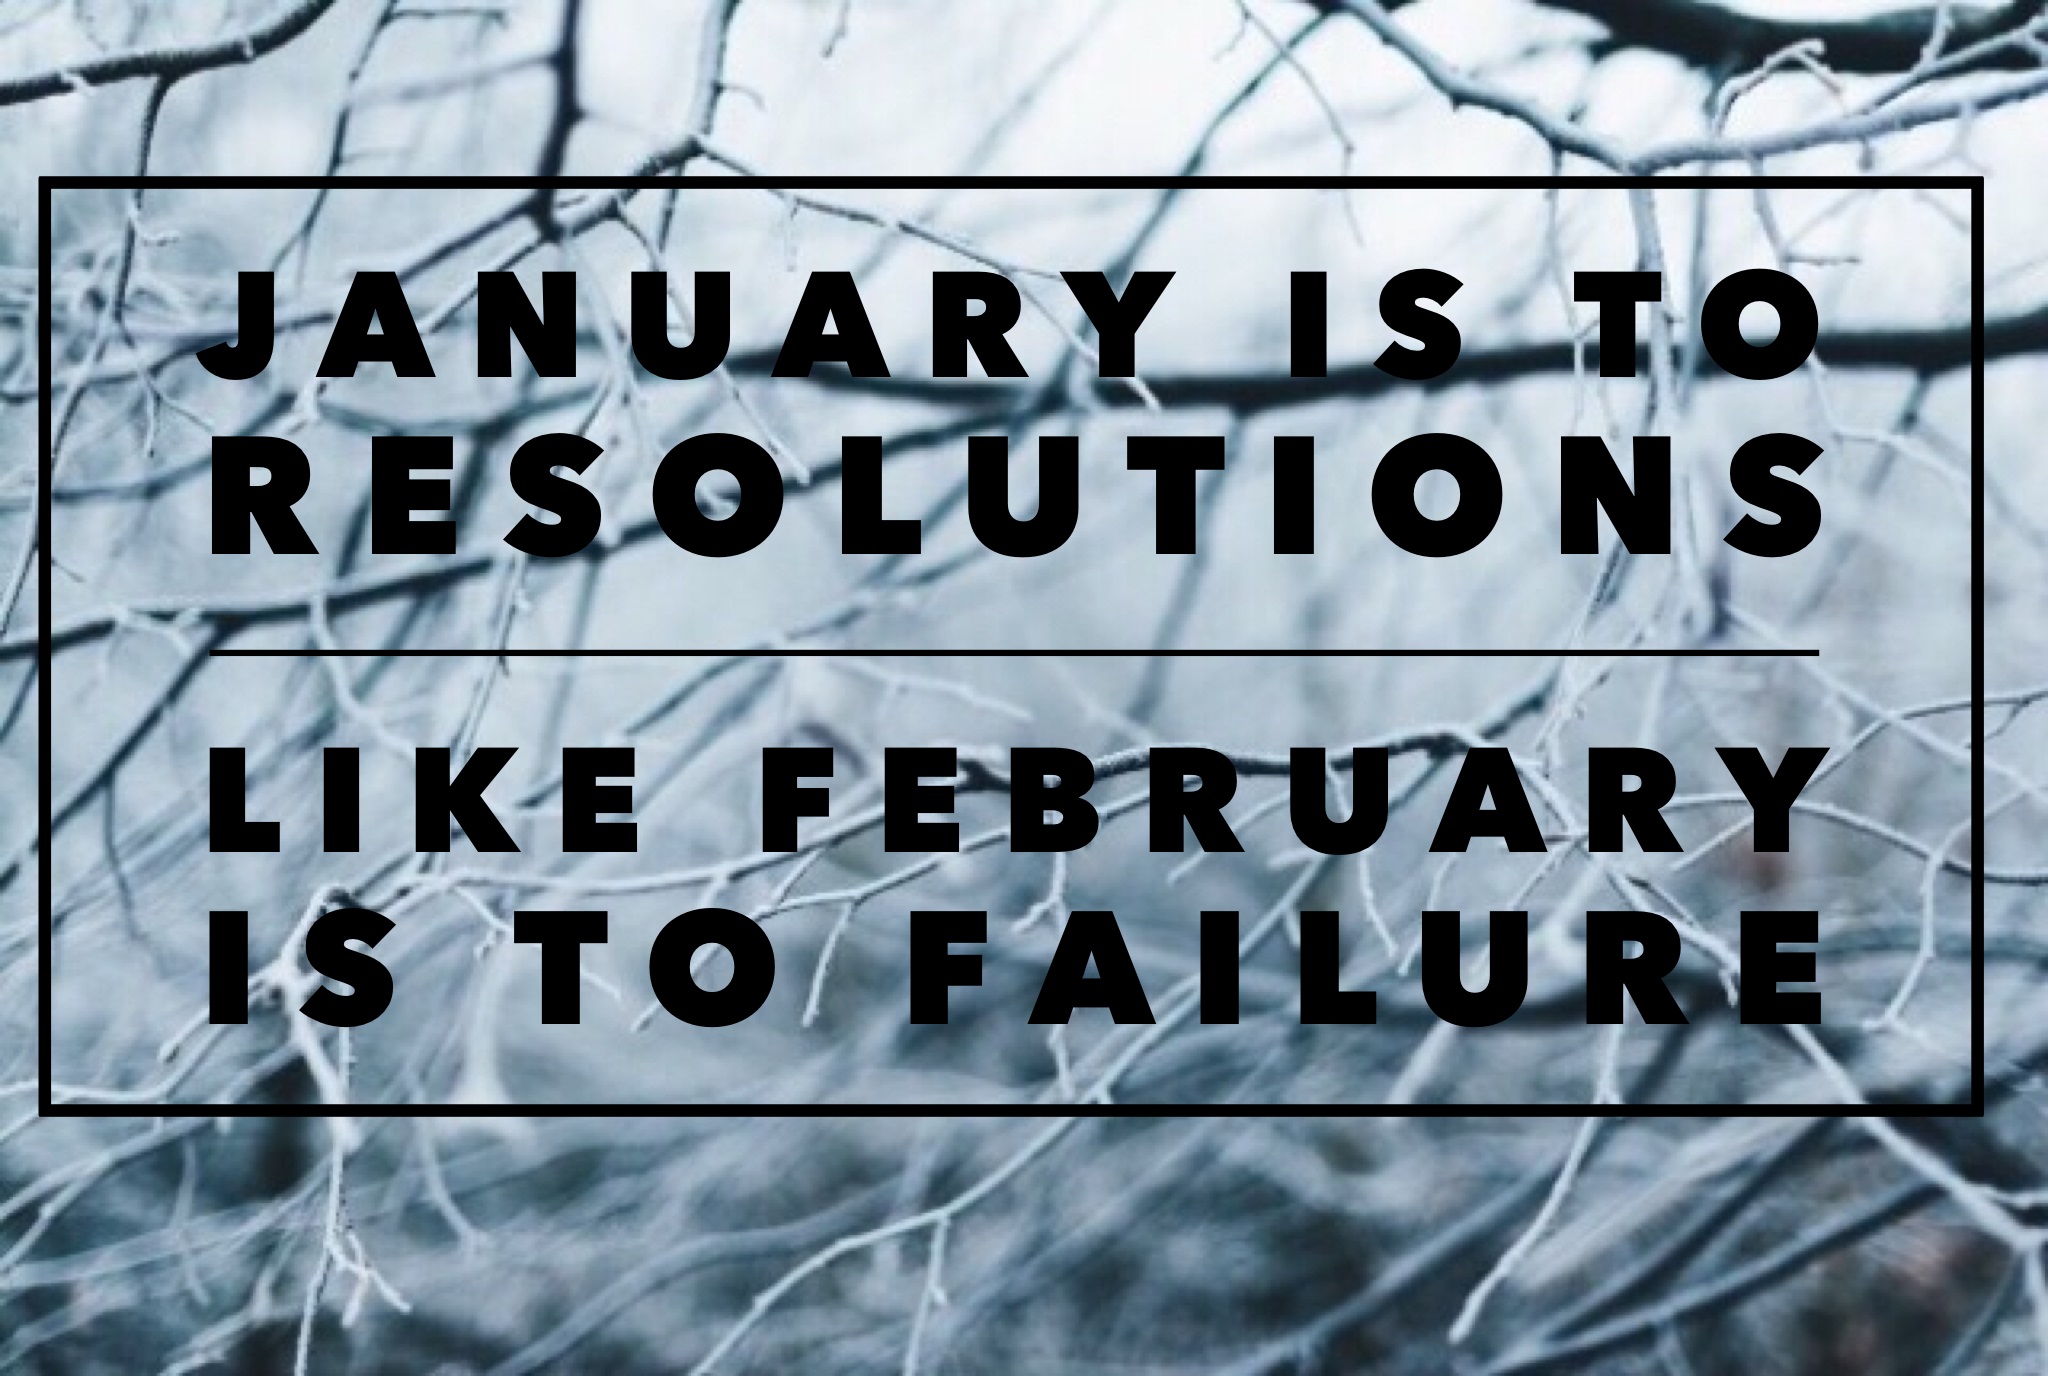 January is to resolutions like February is to failure.